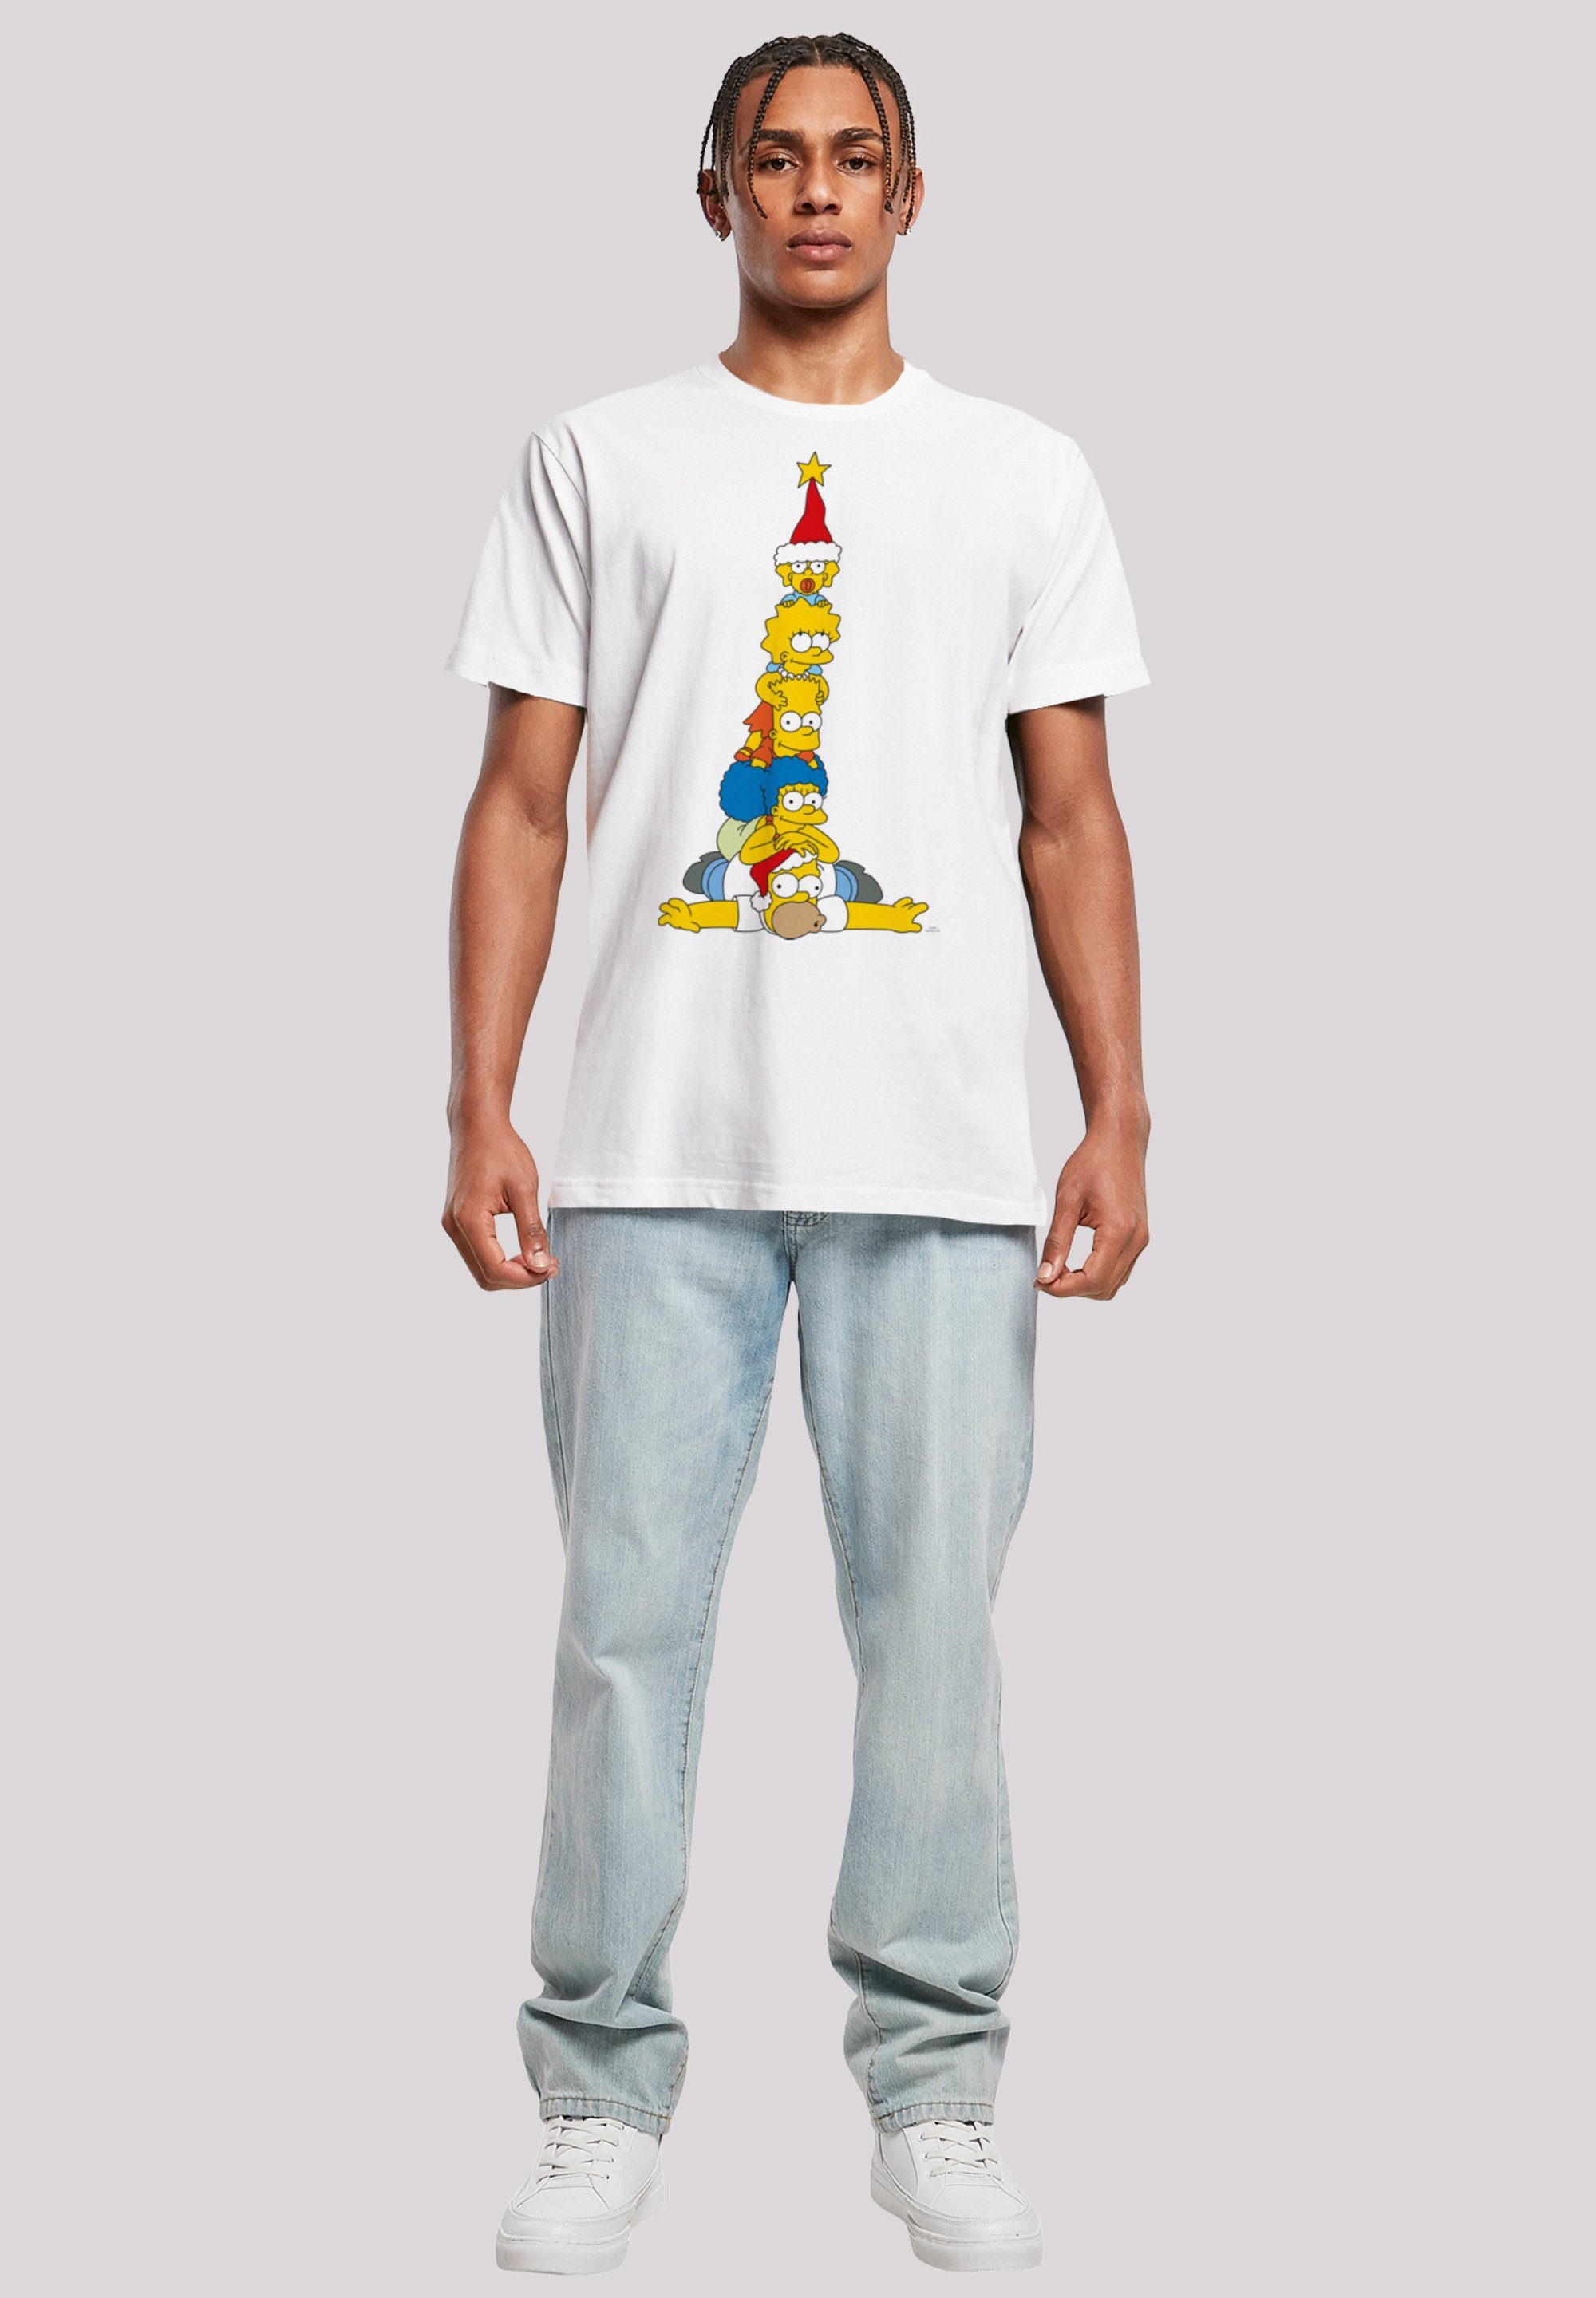 T-Shirt Christmas Weihnachtsbaum weiß F4NT4STIC The Print Simpsons Family